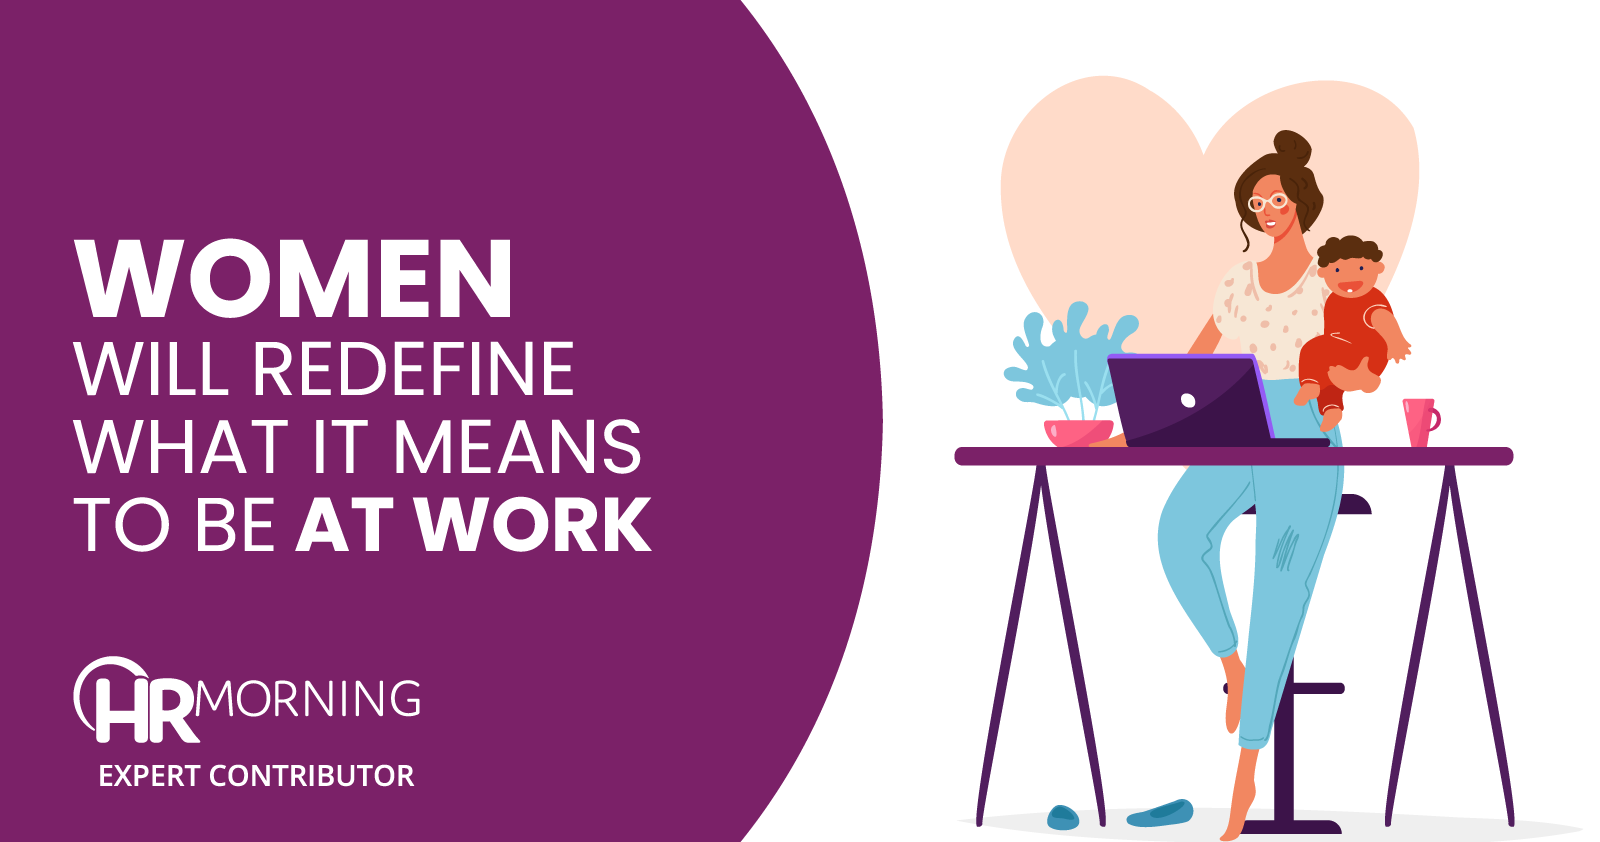 women will redefine what it means to be at work